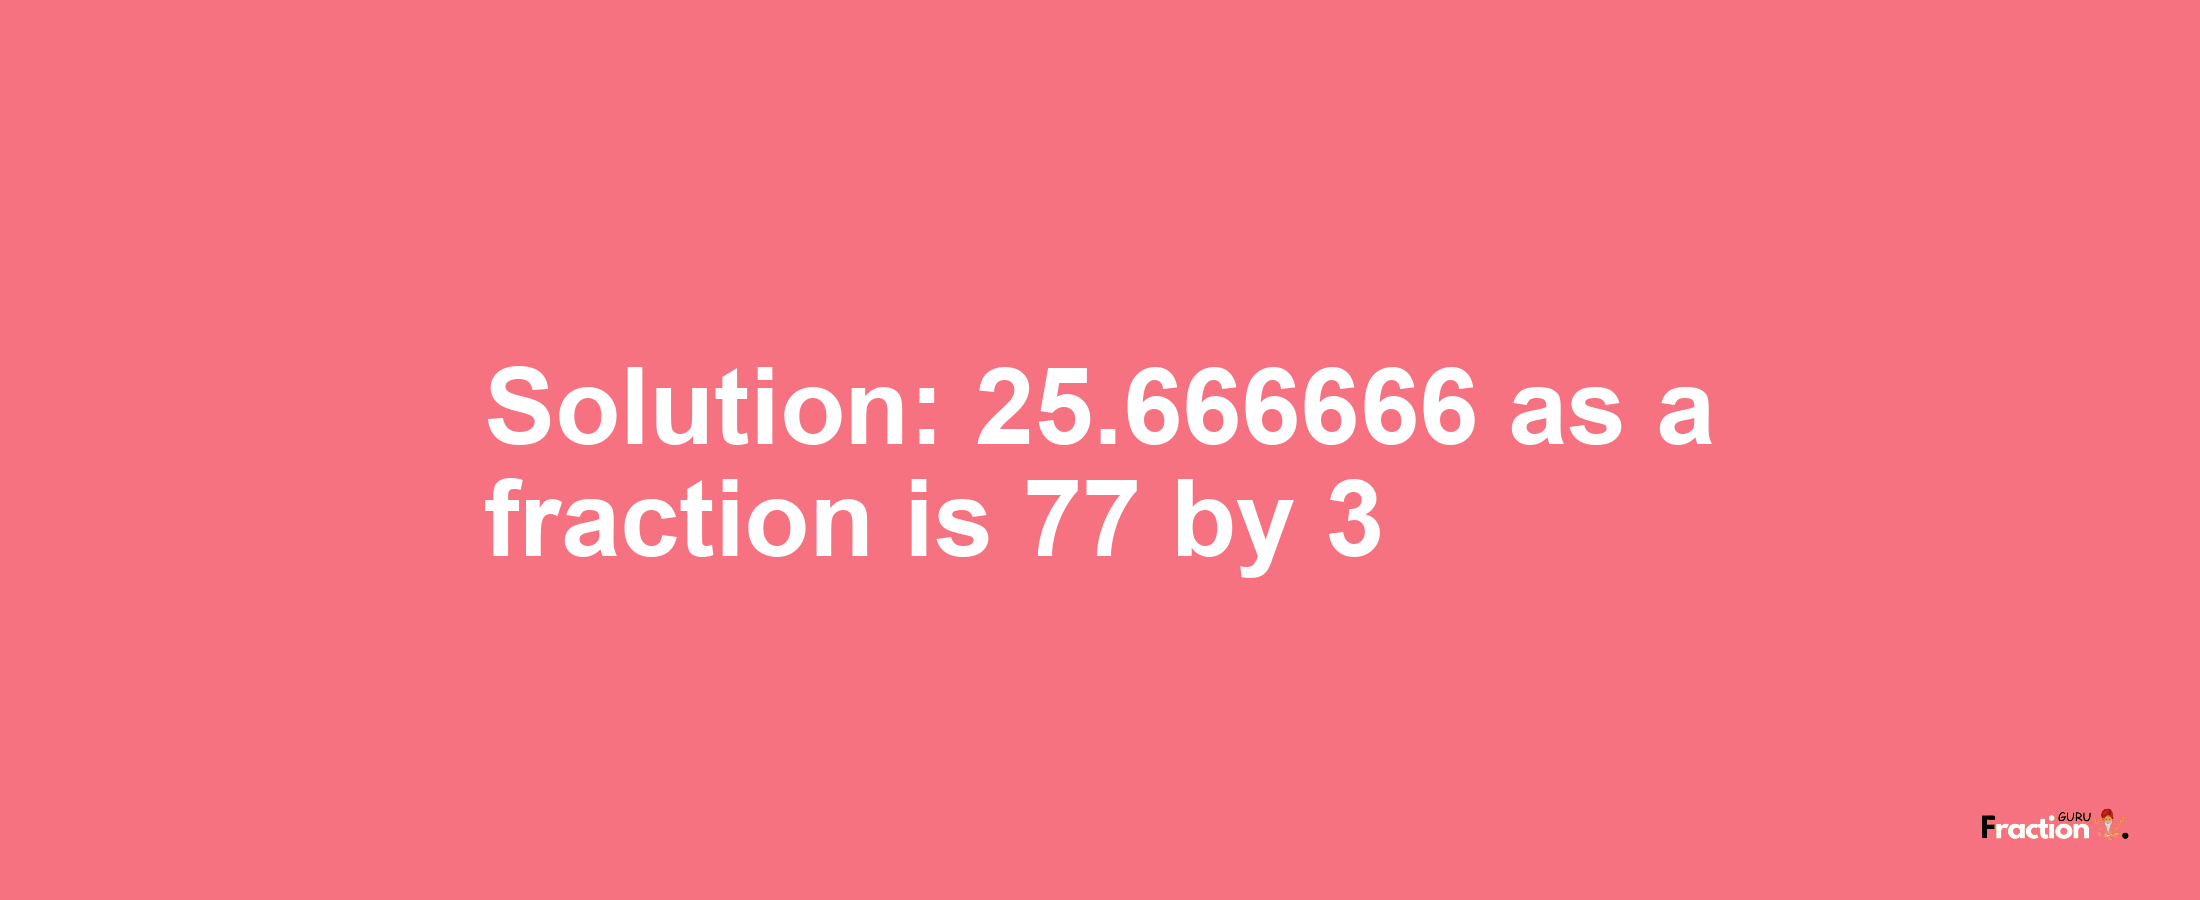 Solution:25.666666 as a fraction is 77/3